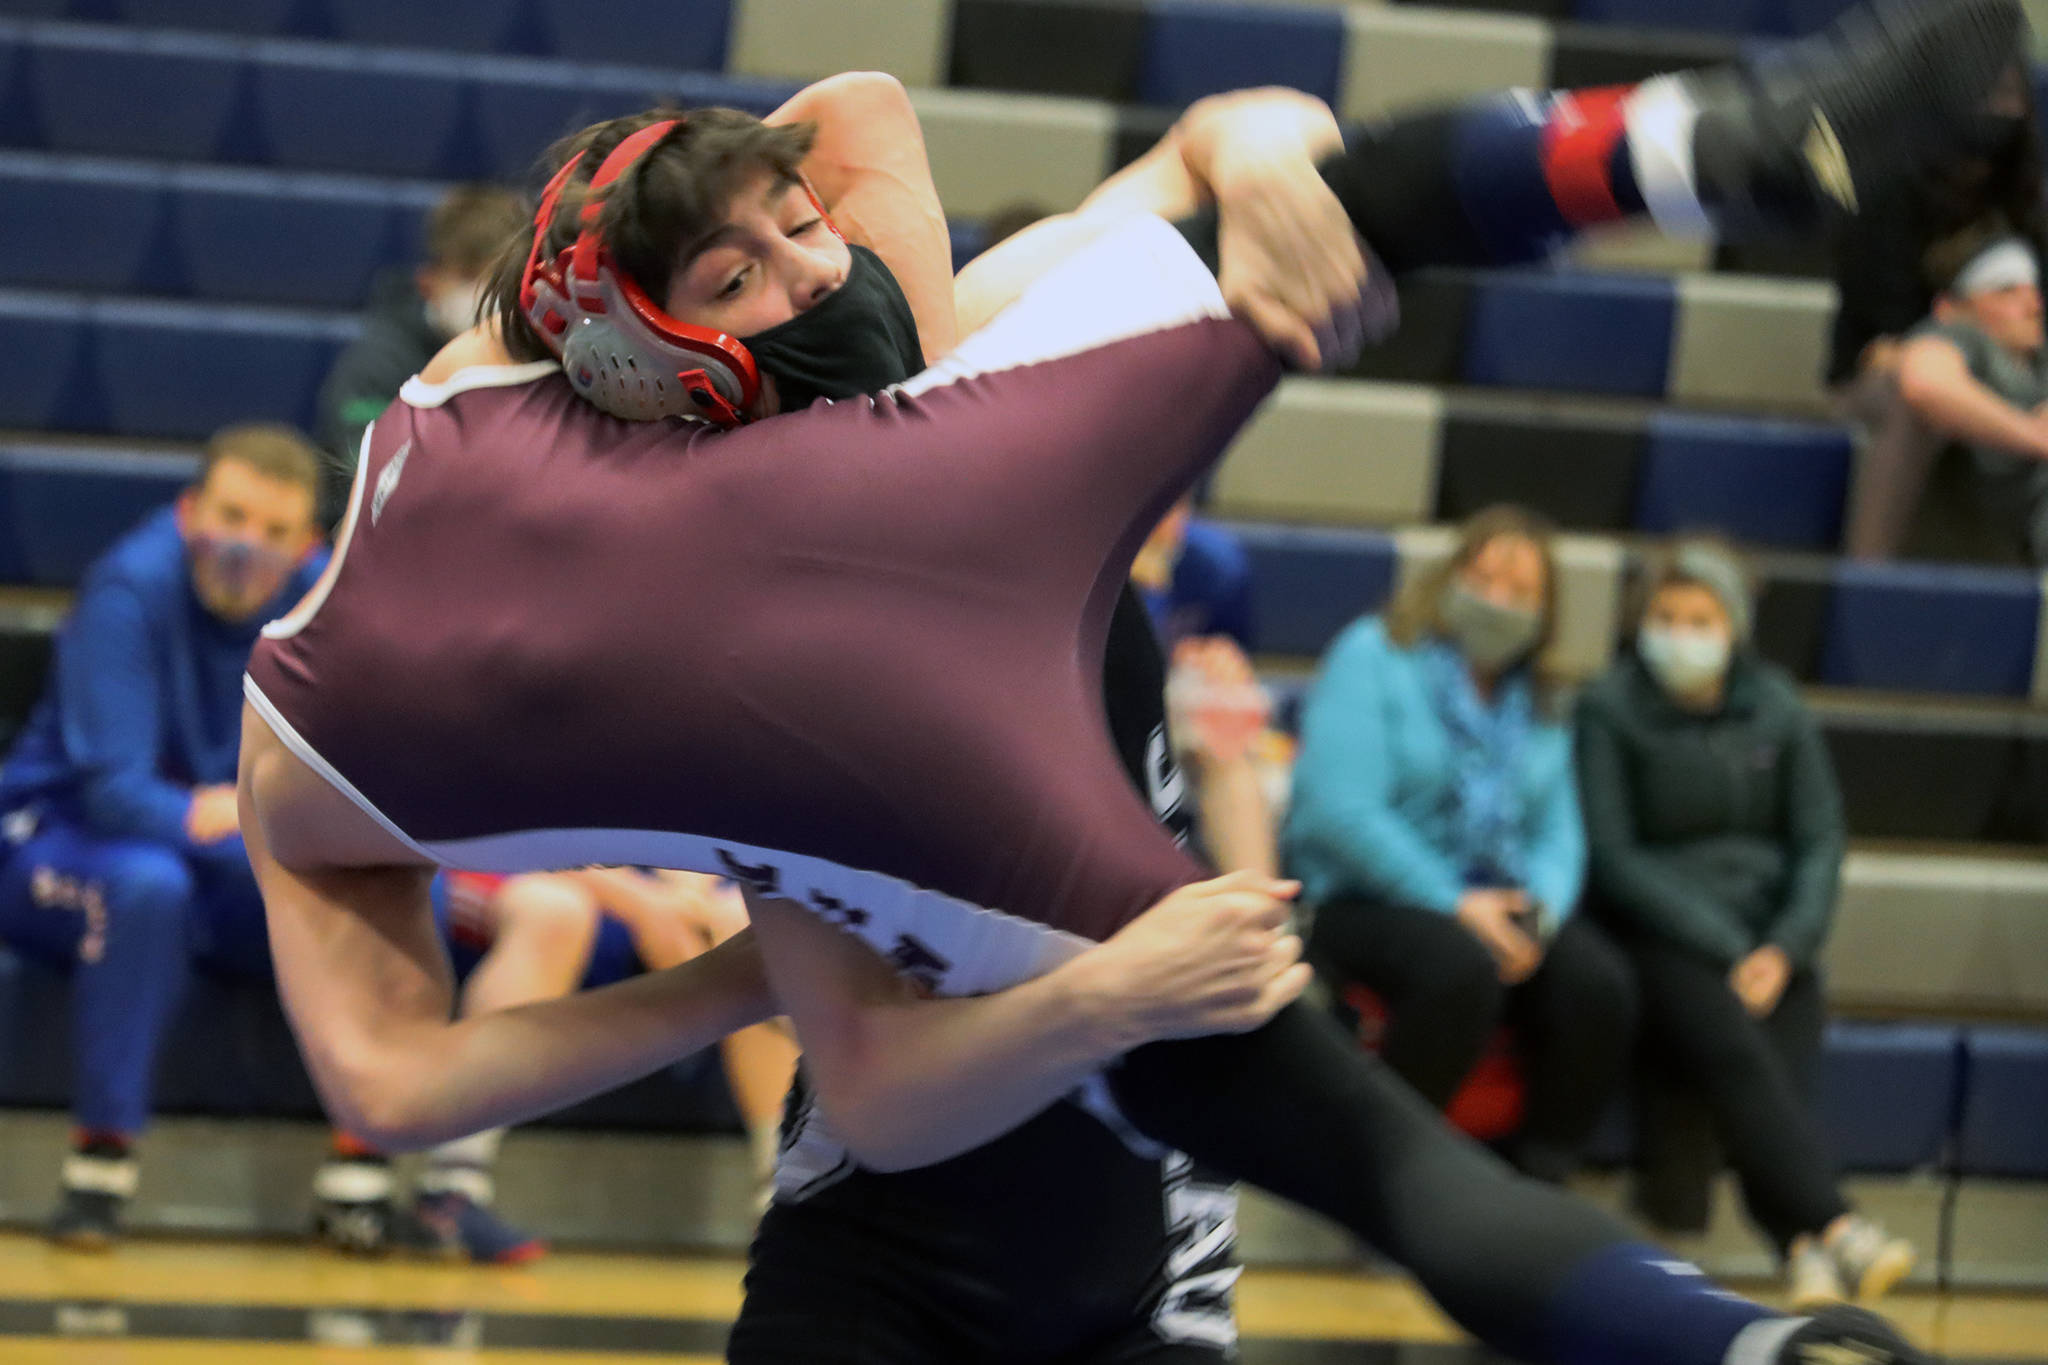 Carson Cummins hoists his opponent from Ketchikan High School before taking him to the mat during a tournament at Thunder Mountain High School on Friday, April 3. Cummins went undefeated during the tournament and took first place in the 112-pound division. (Ben Hohenstatt / Juneau Empire).